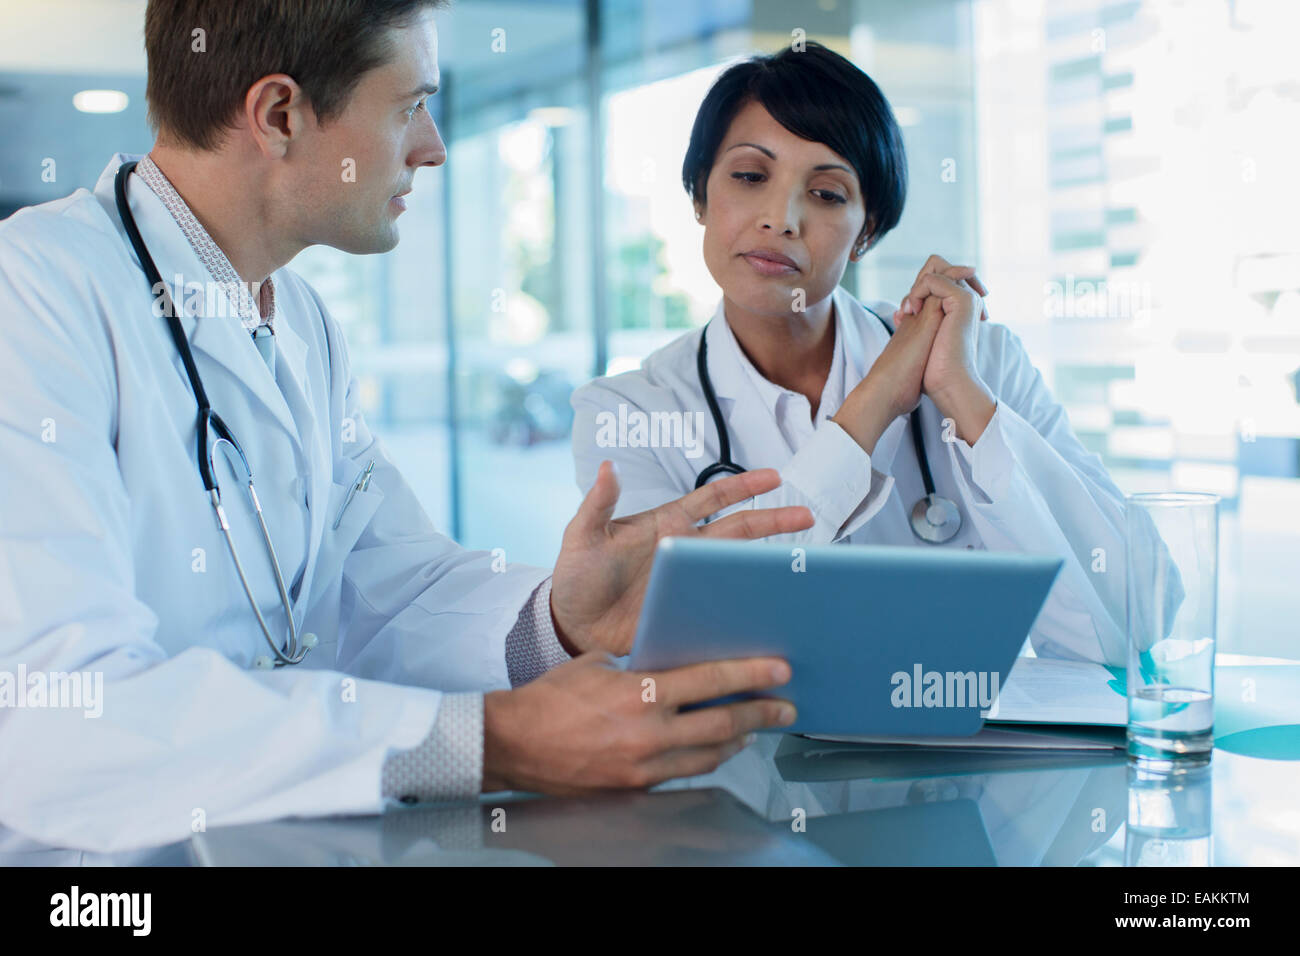 Doctors discussing patient's treatment at desk, using digital tablet Stock Photo